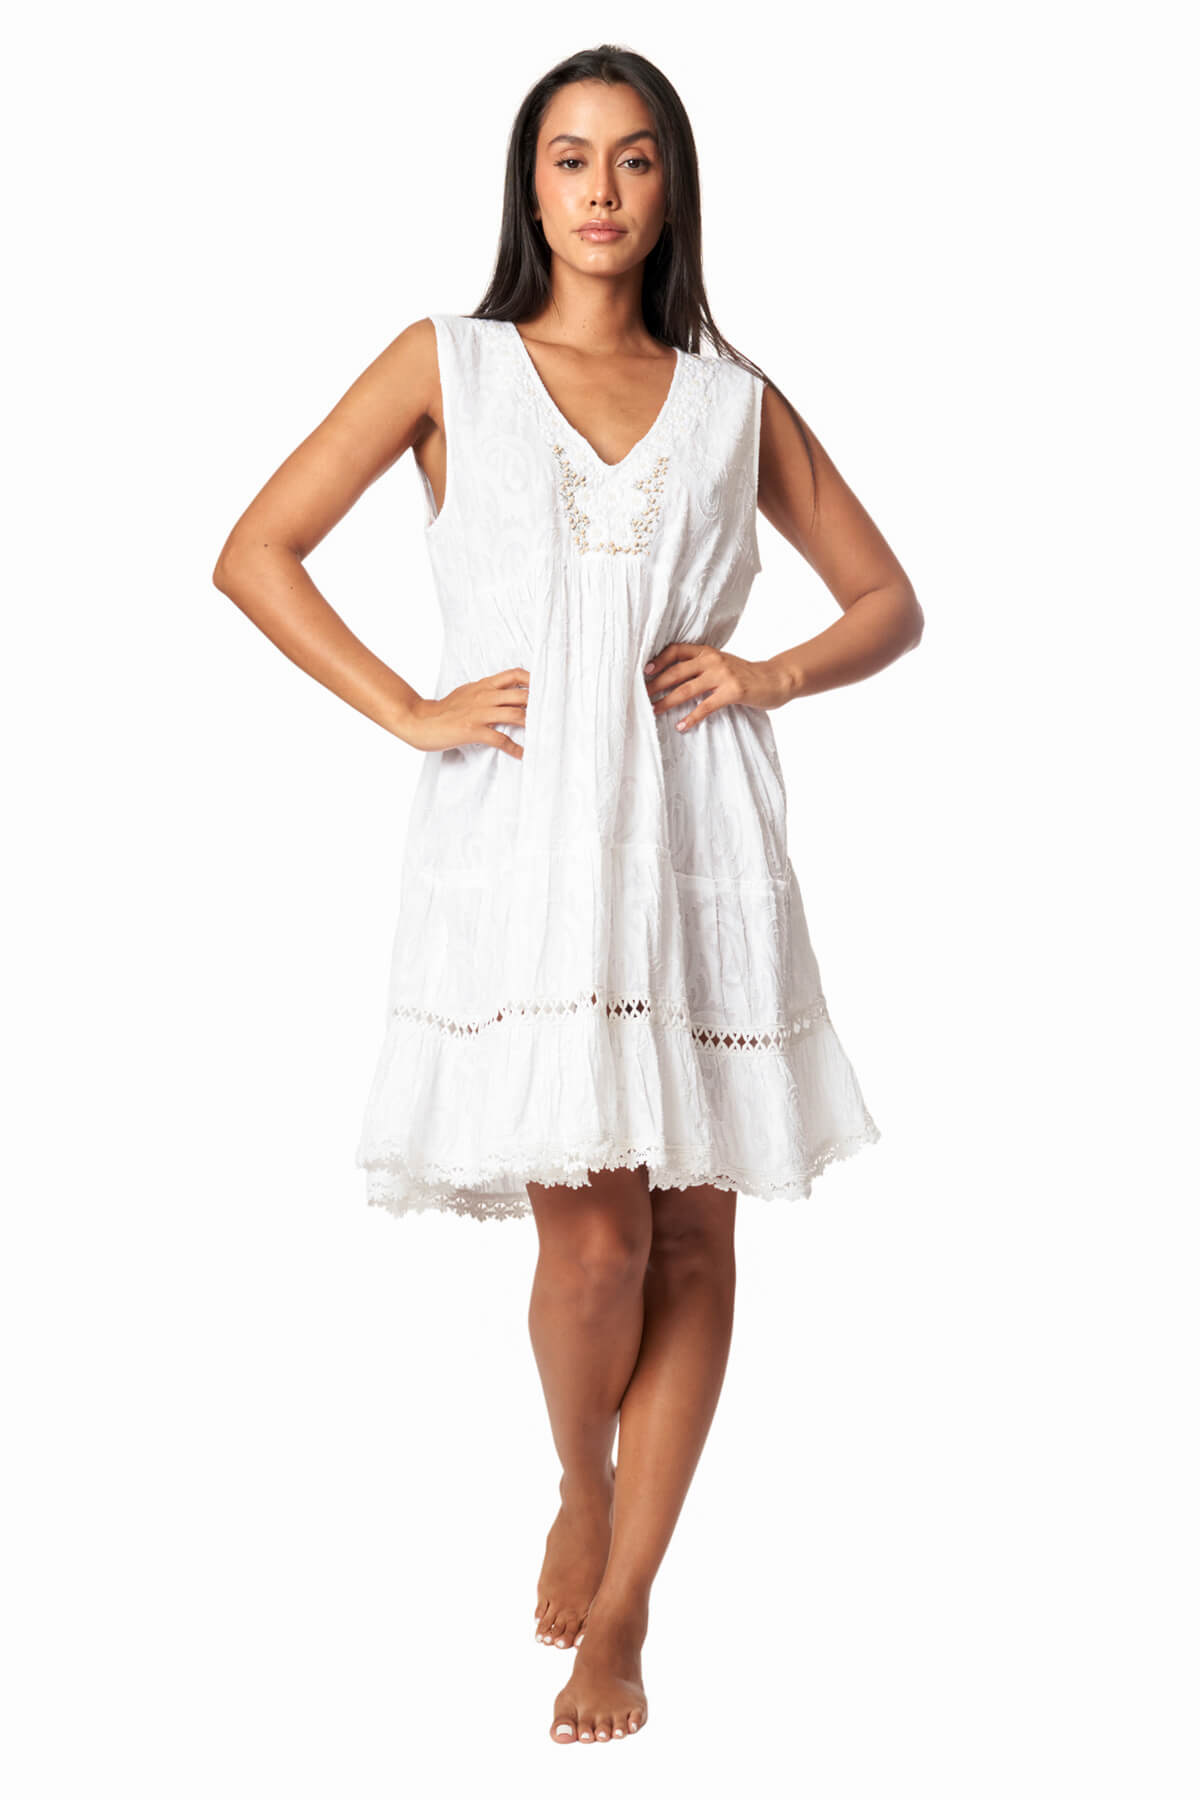 Finley White Solid Beaded Mini Cover Up Dress